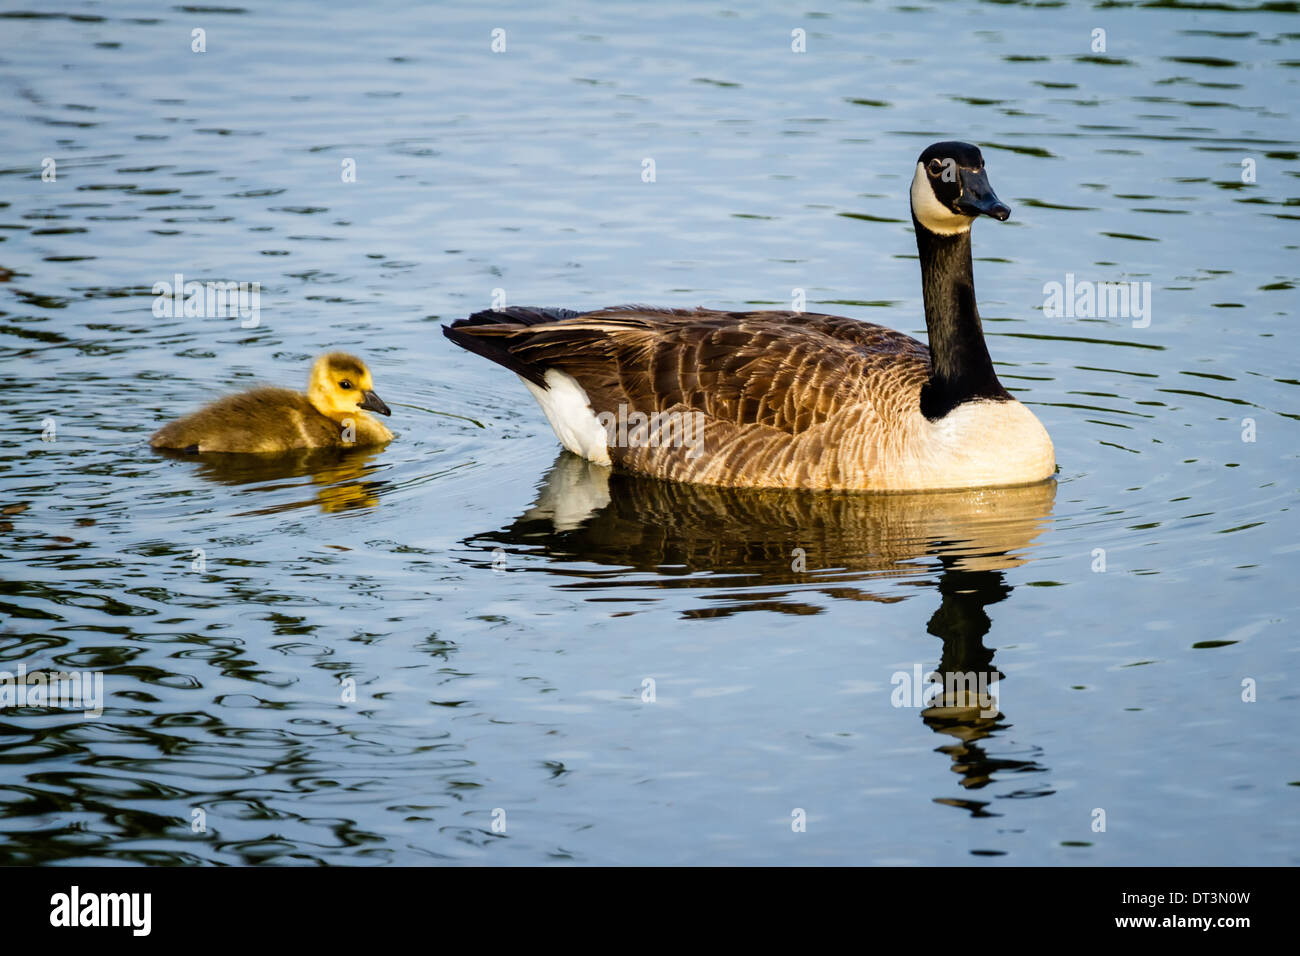 Canada Goose and Gosling (Branta canadensis) swimming in a pond. Stock Photo